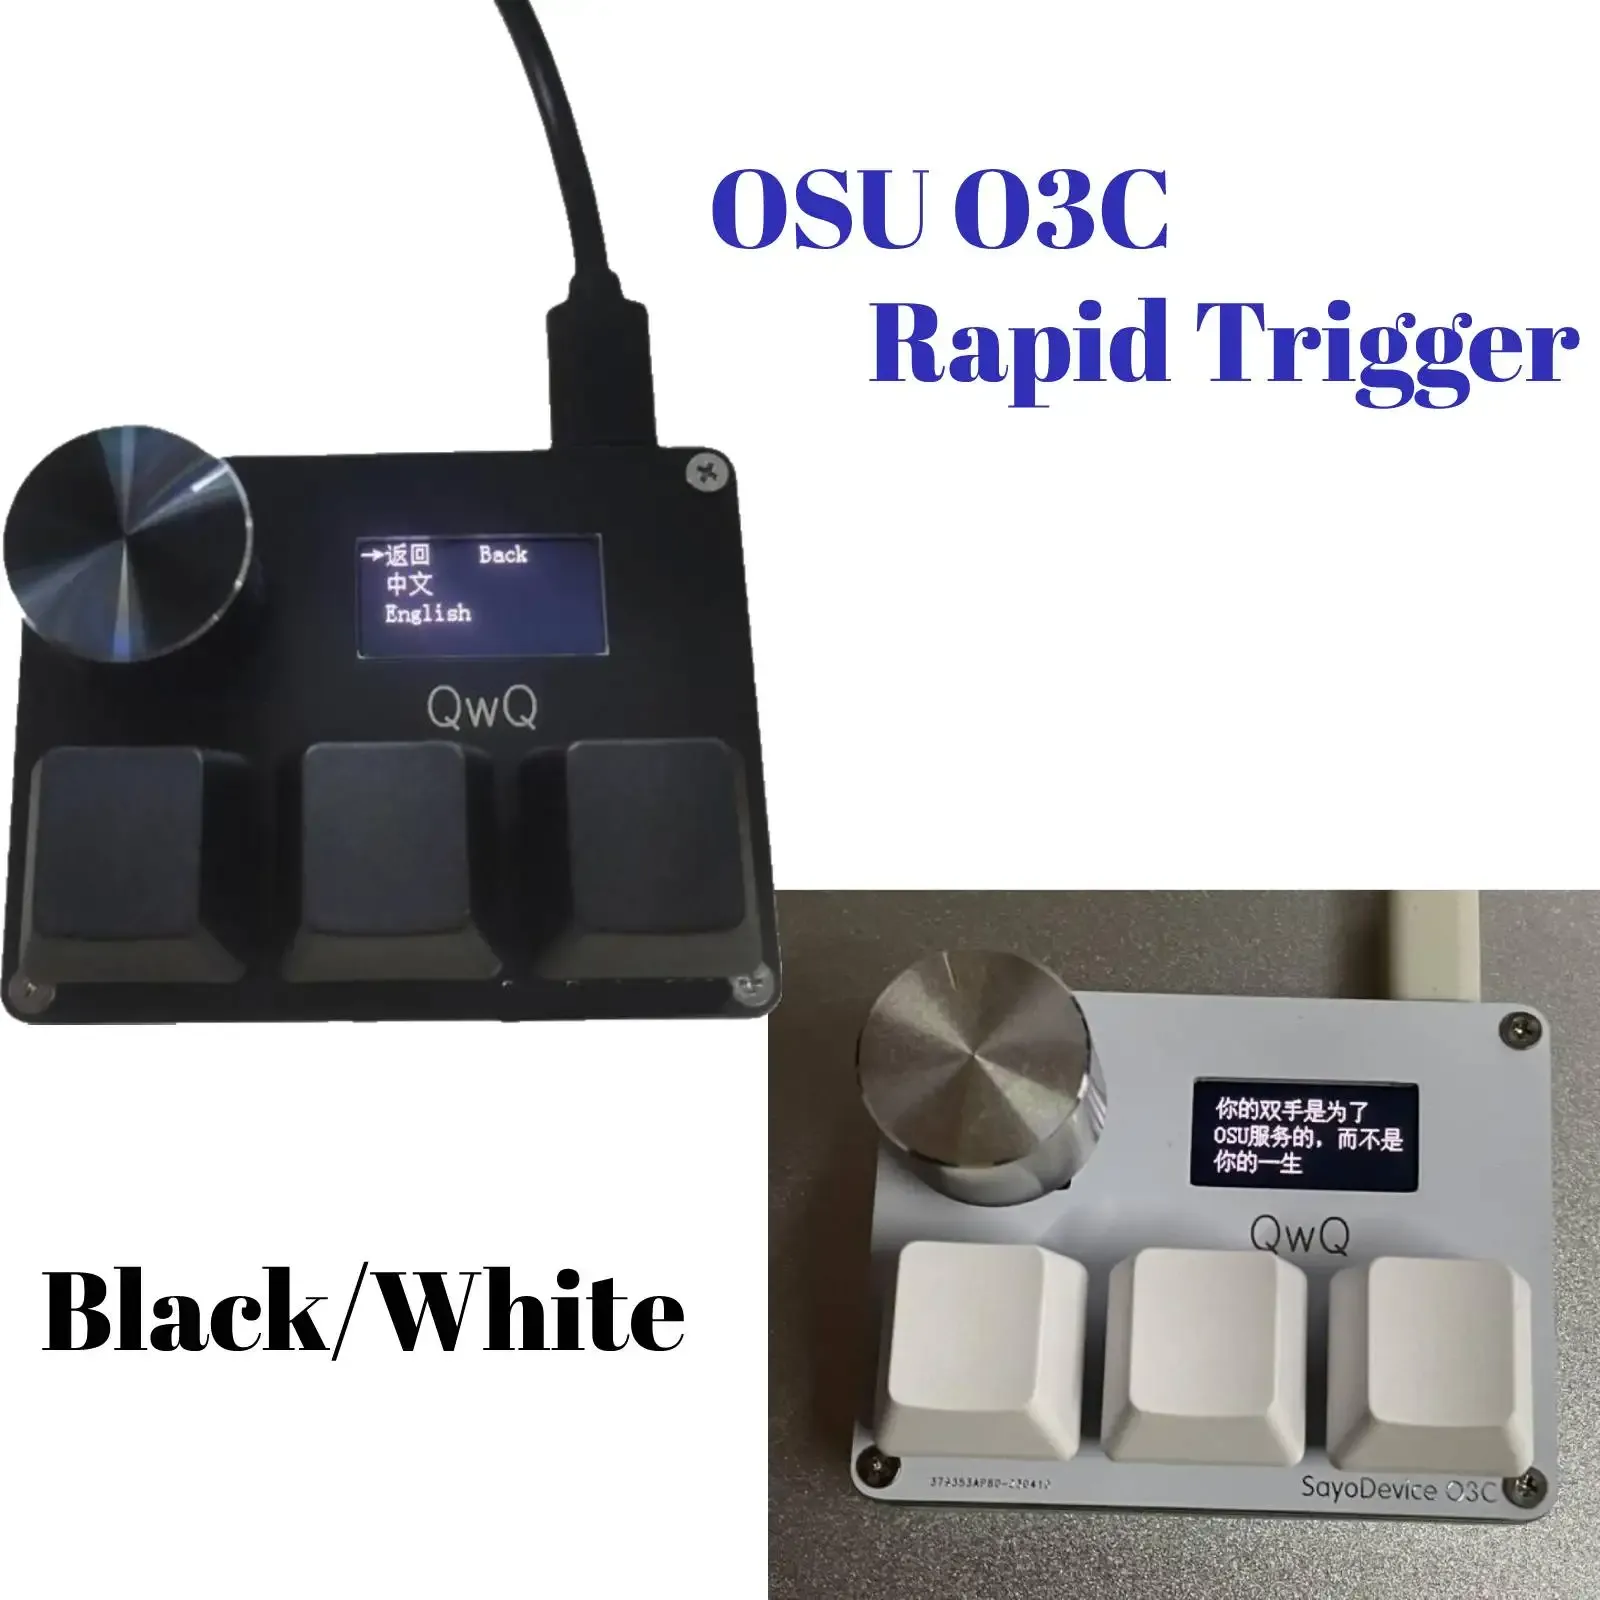 Keyboards SayoDevice OSU O3C Rapid Trigger Hall Switches Wooting Magnetic Red Switches Keyboard With Knob And Screen Copy Paste Shotcut